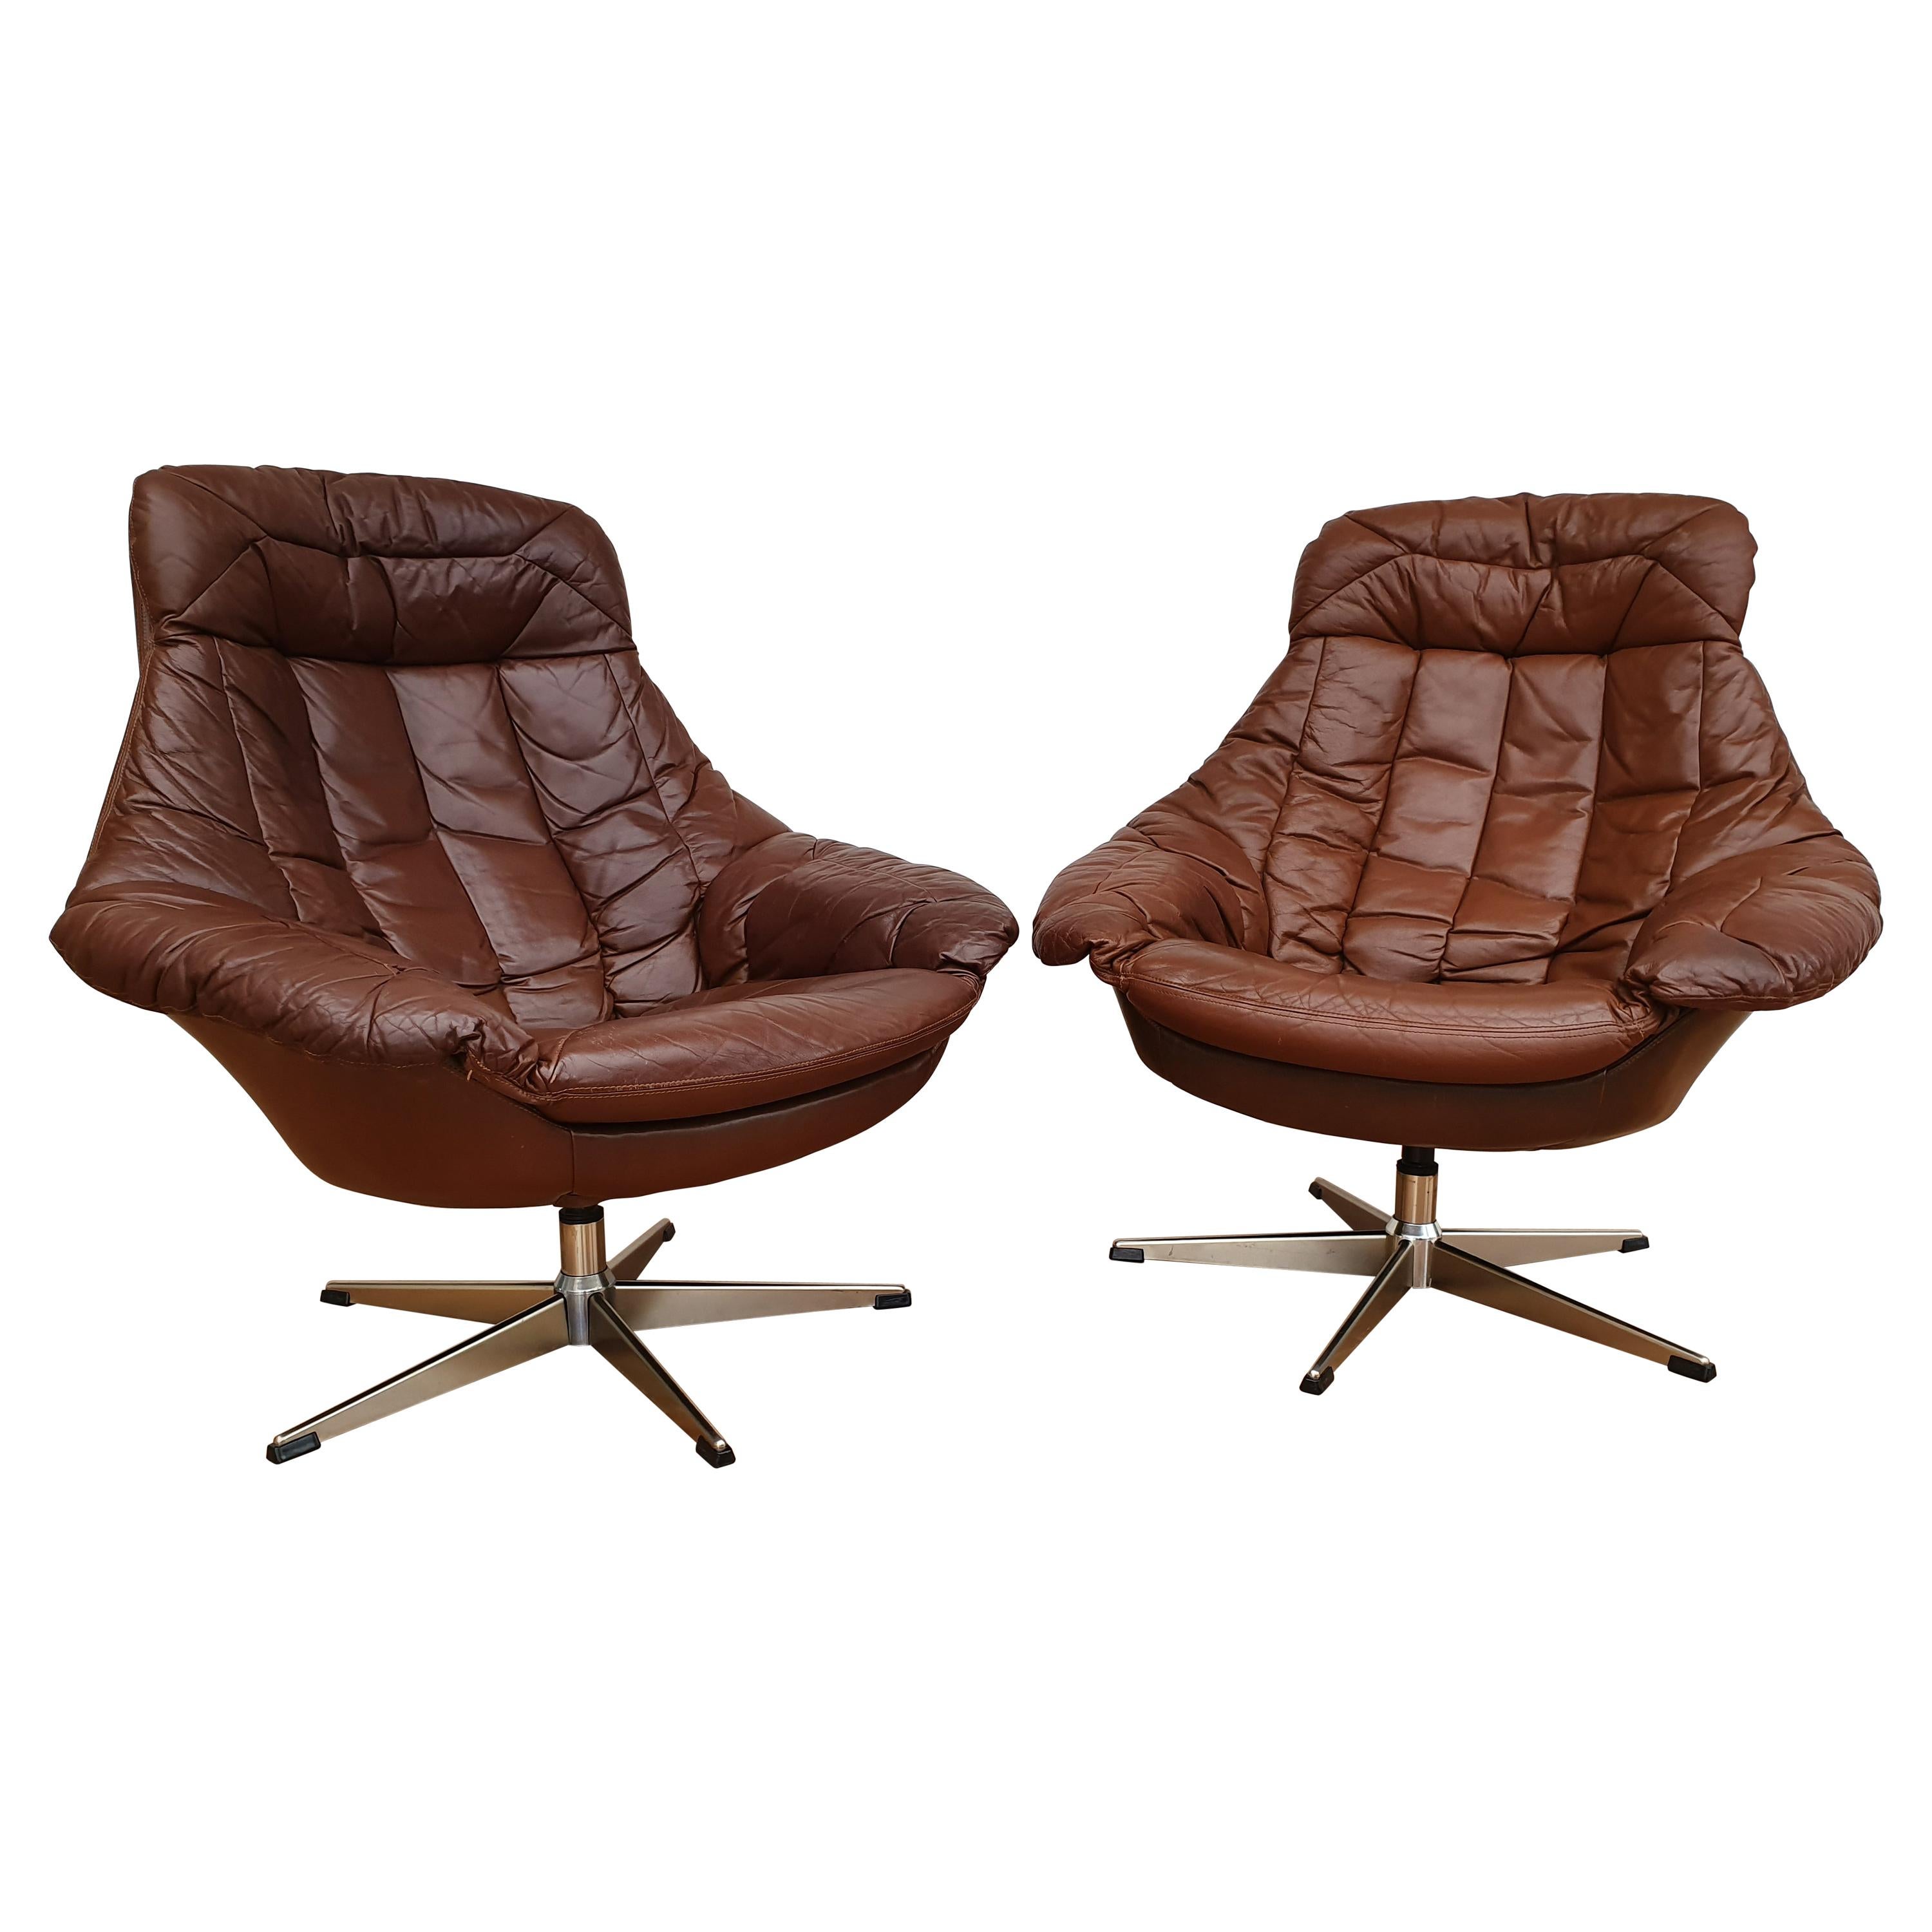 Danish Design, Henry Walter Klein, Pair of High-Backed Armchairs, Swivel Base For Sale